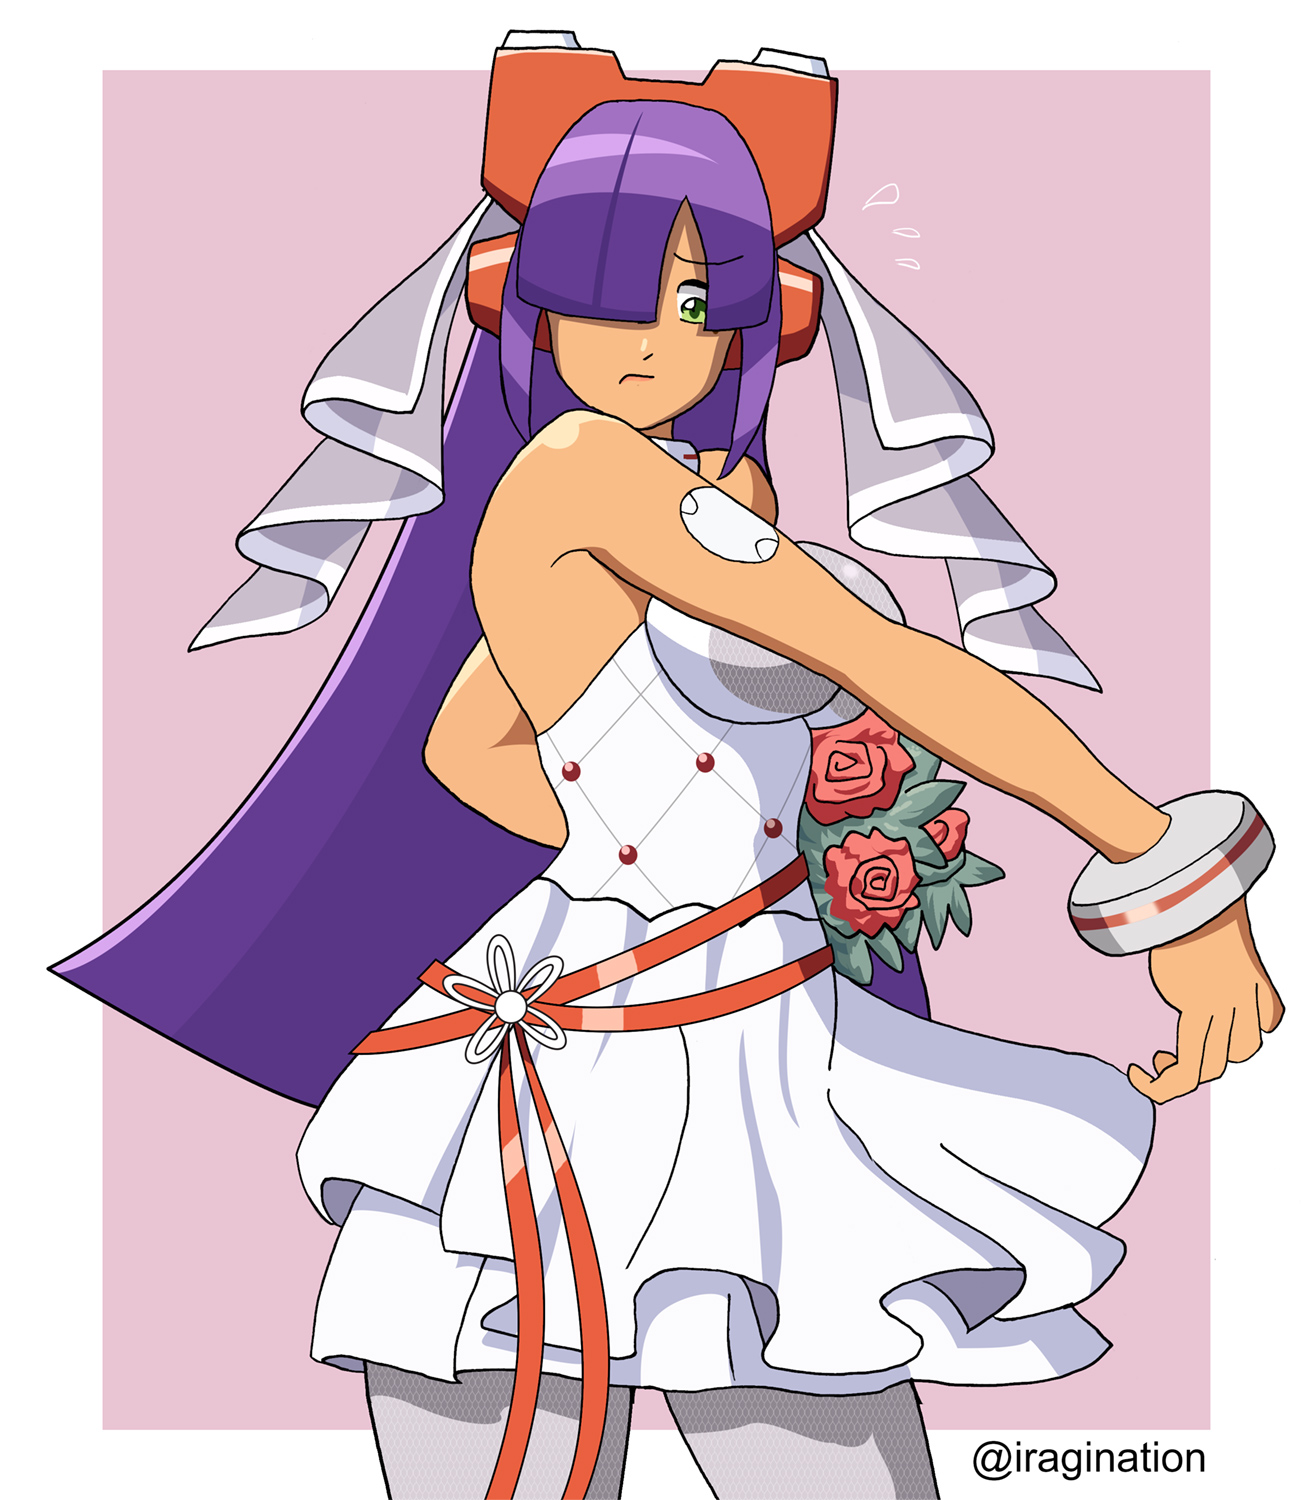 Bridal Layer - Rockman X DiVE
I had to crop Layer to fit her in the comic panel, so this is the full image.

See [url=https://www.iragination.com/illust/displayimage.php?pos=-536]the source comic[/url] for context.

Keywords: layer